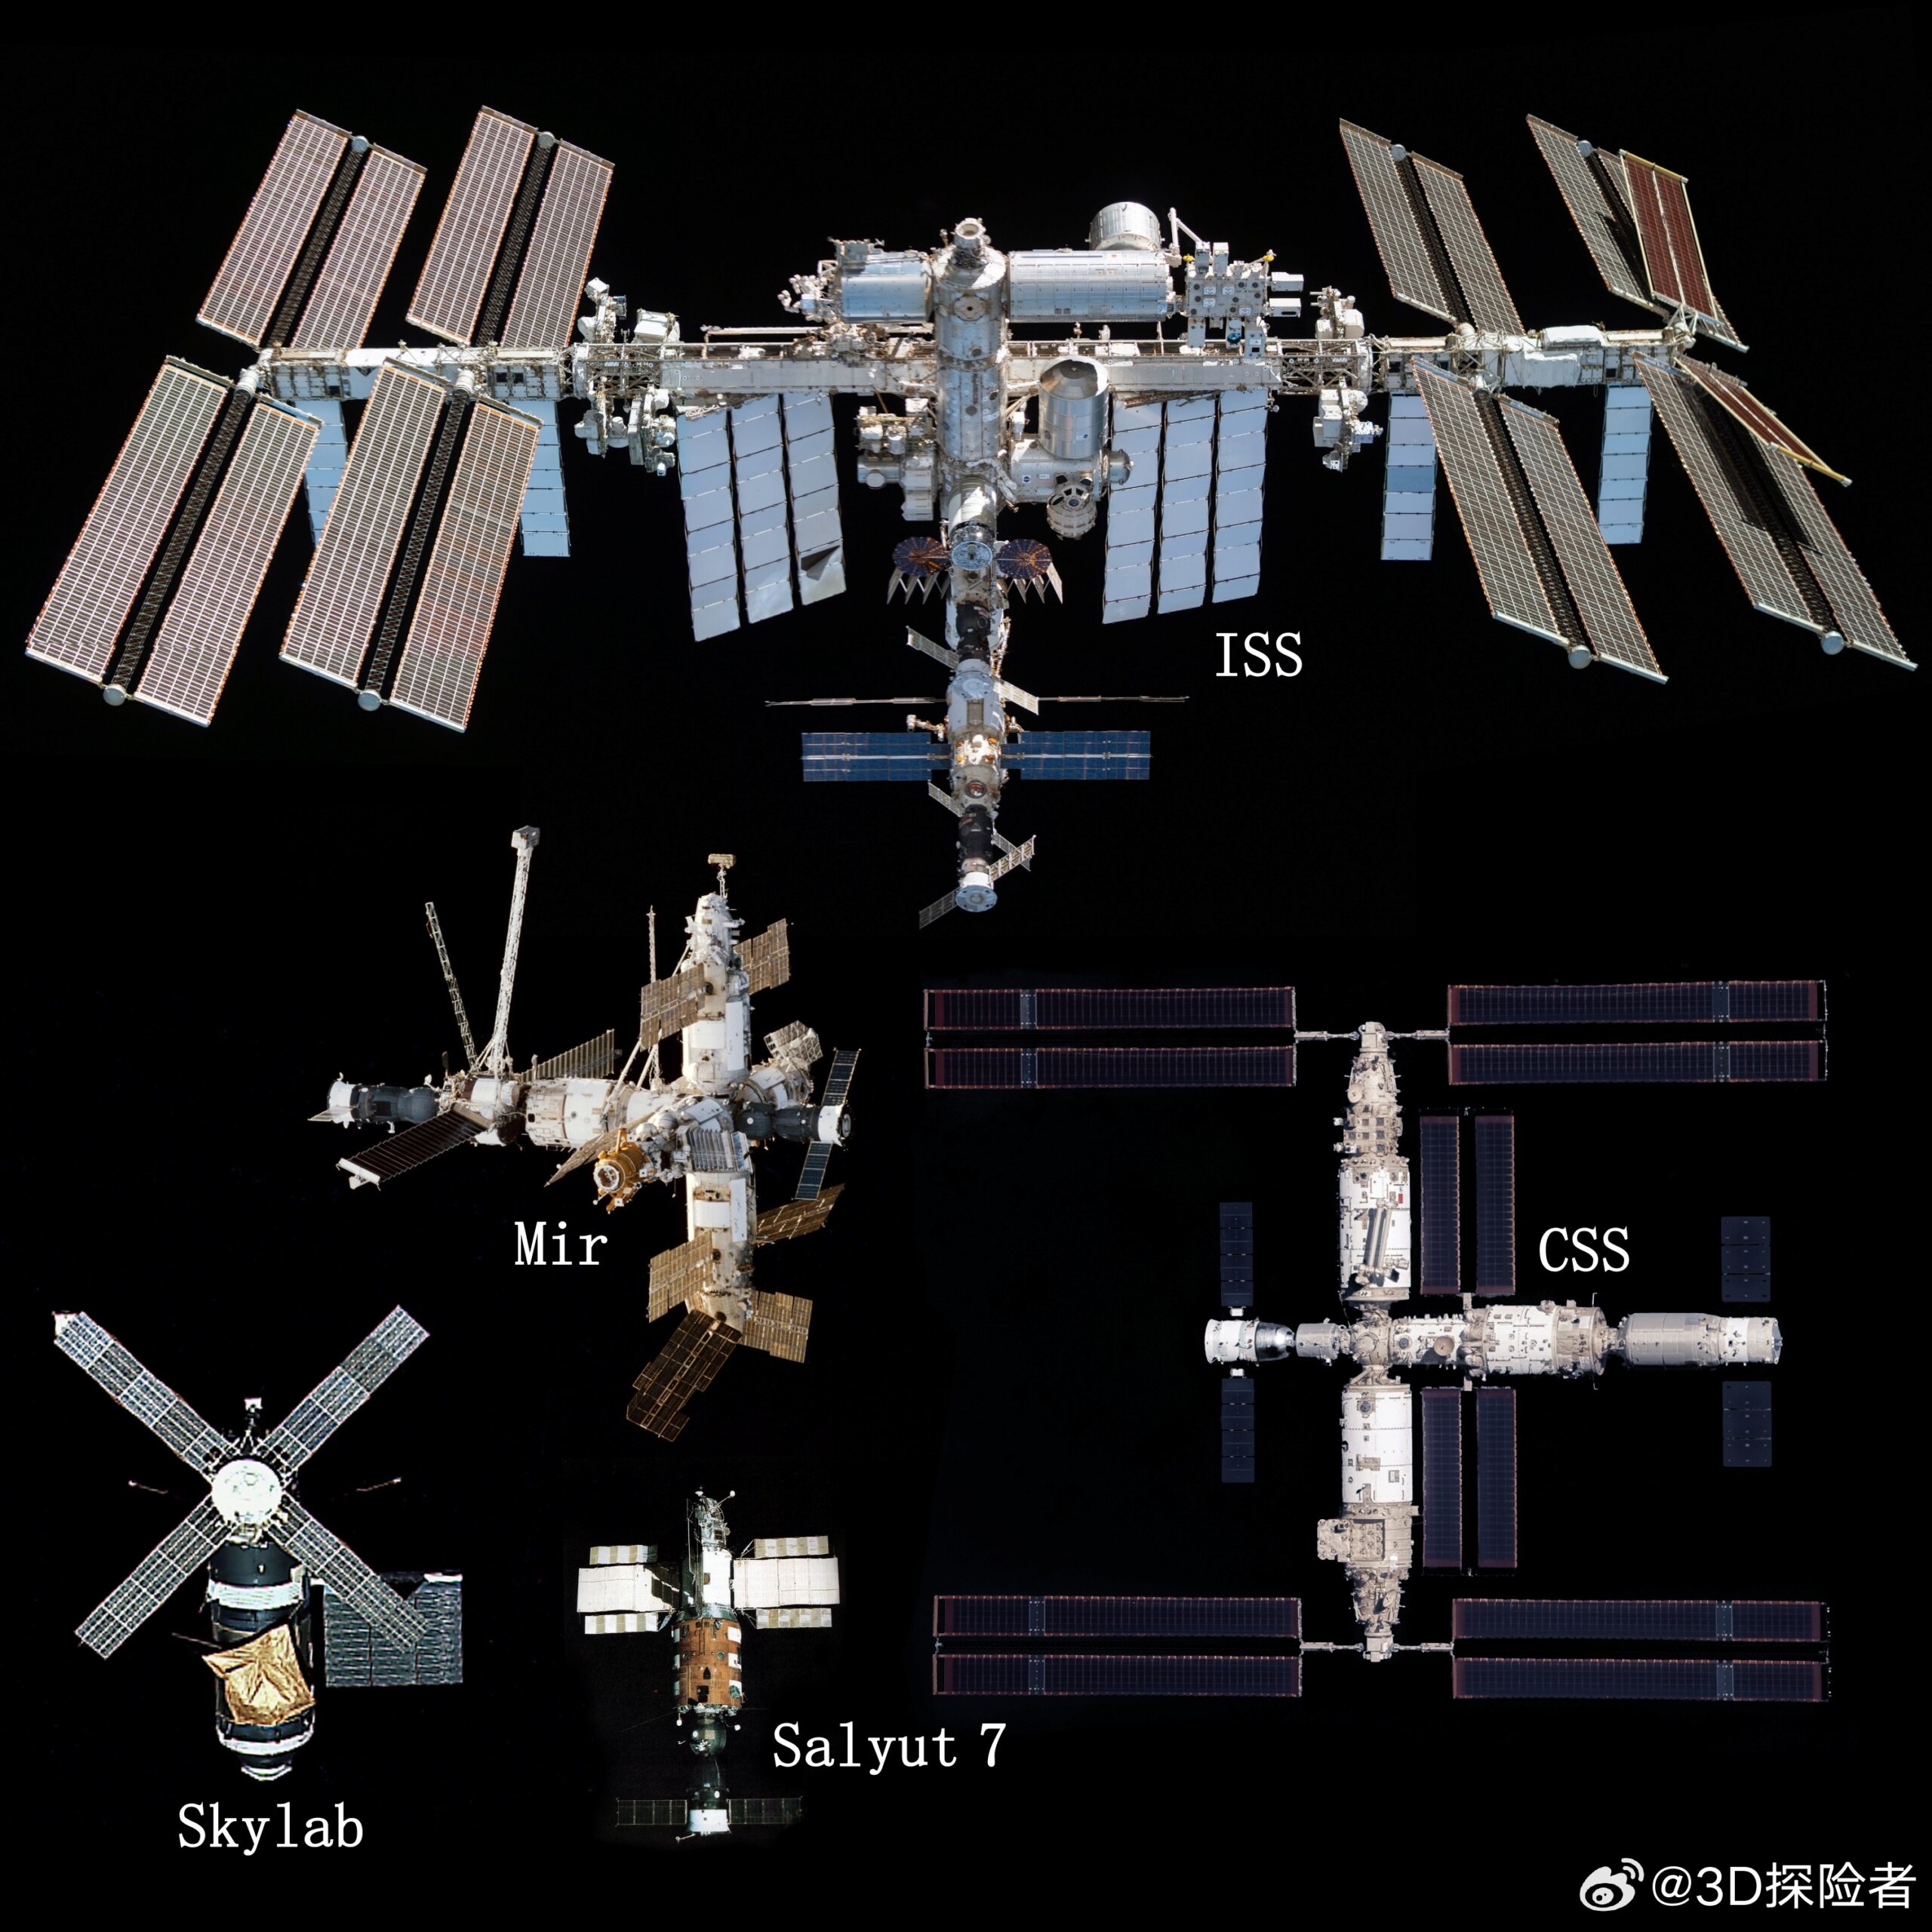 station - Station spatiale chinoise (Tiangong/CSS) - Page 23 23112810